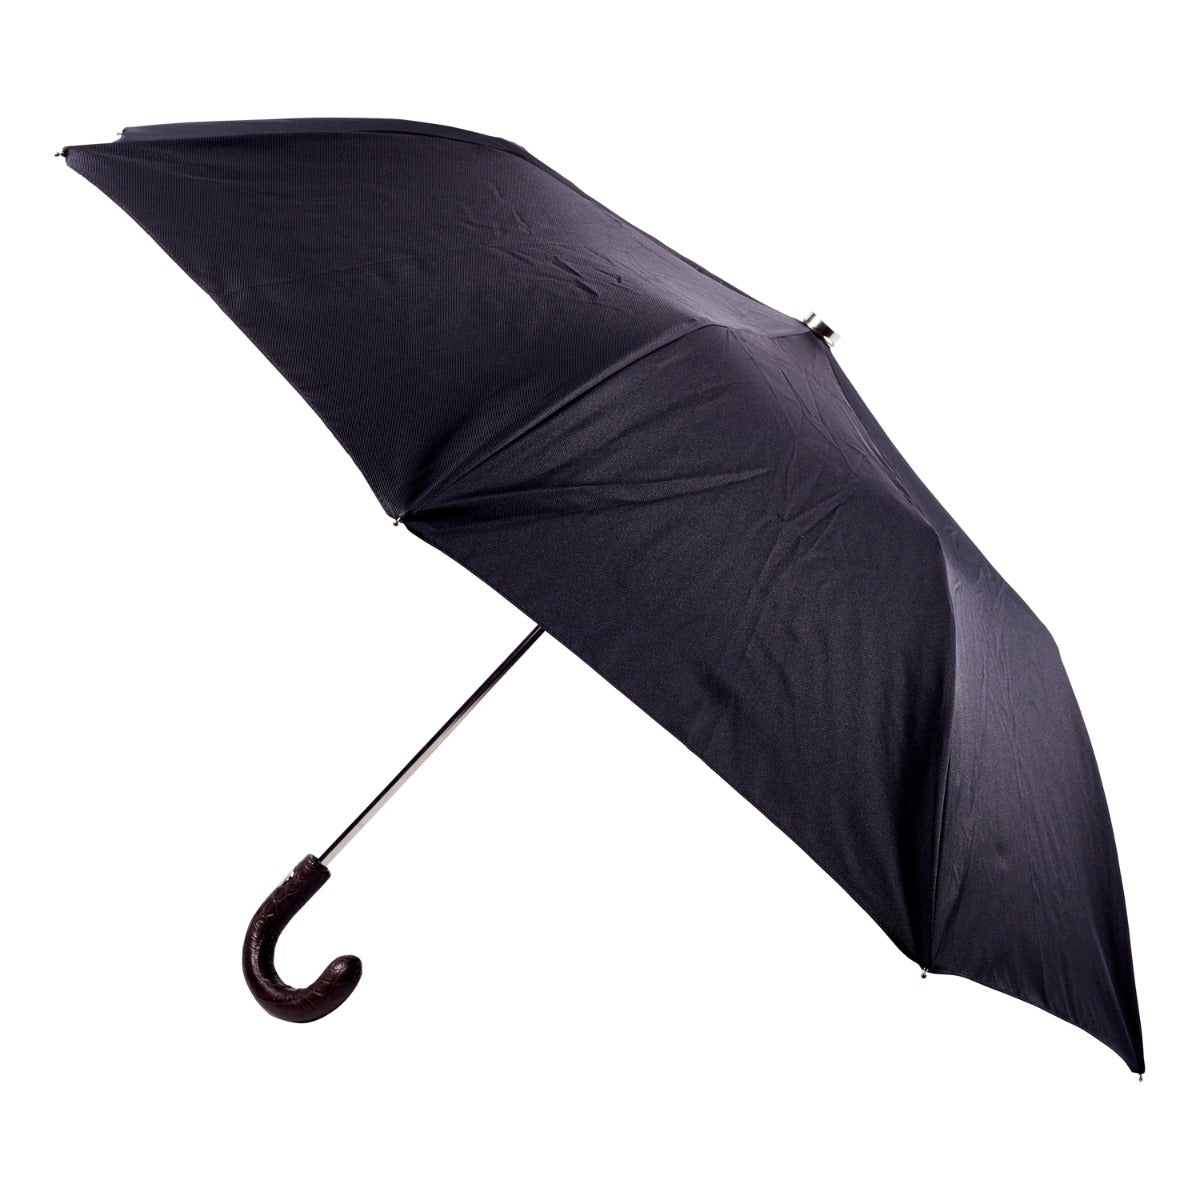 A Brown Alligator Travel Umbrella with Black Canopy from KirbyAllison.com on a white background.